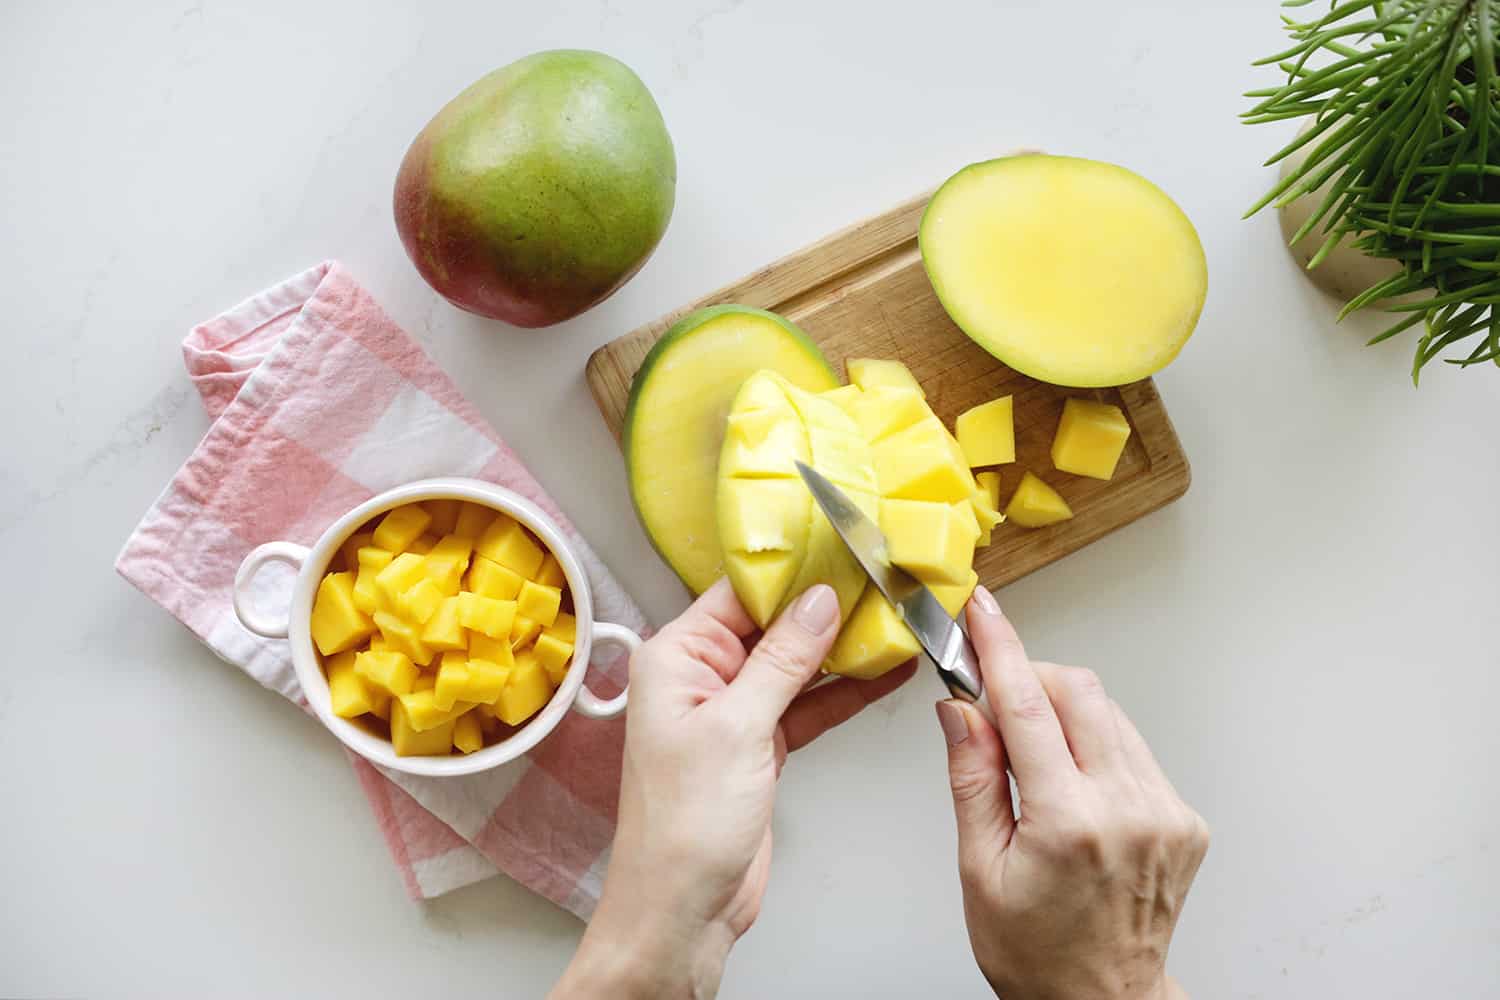 Cut off the pieces of mango by hand